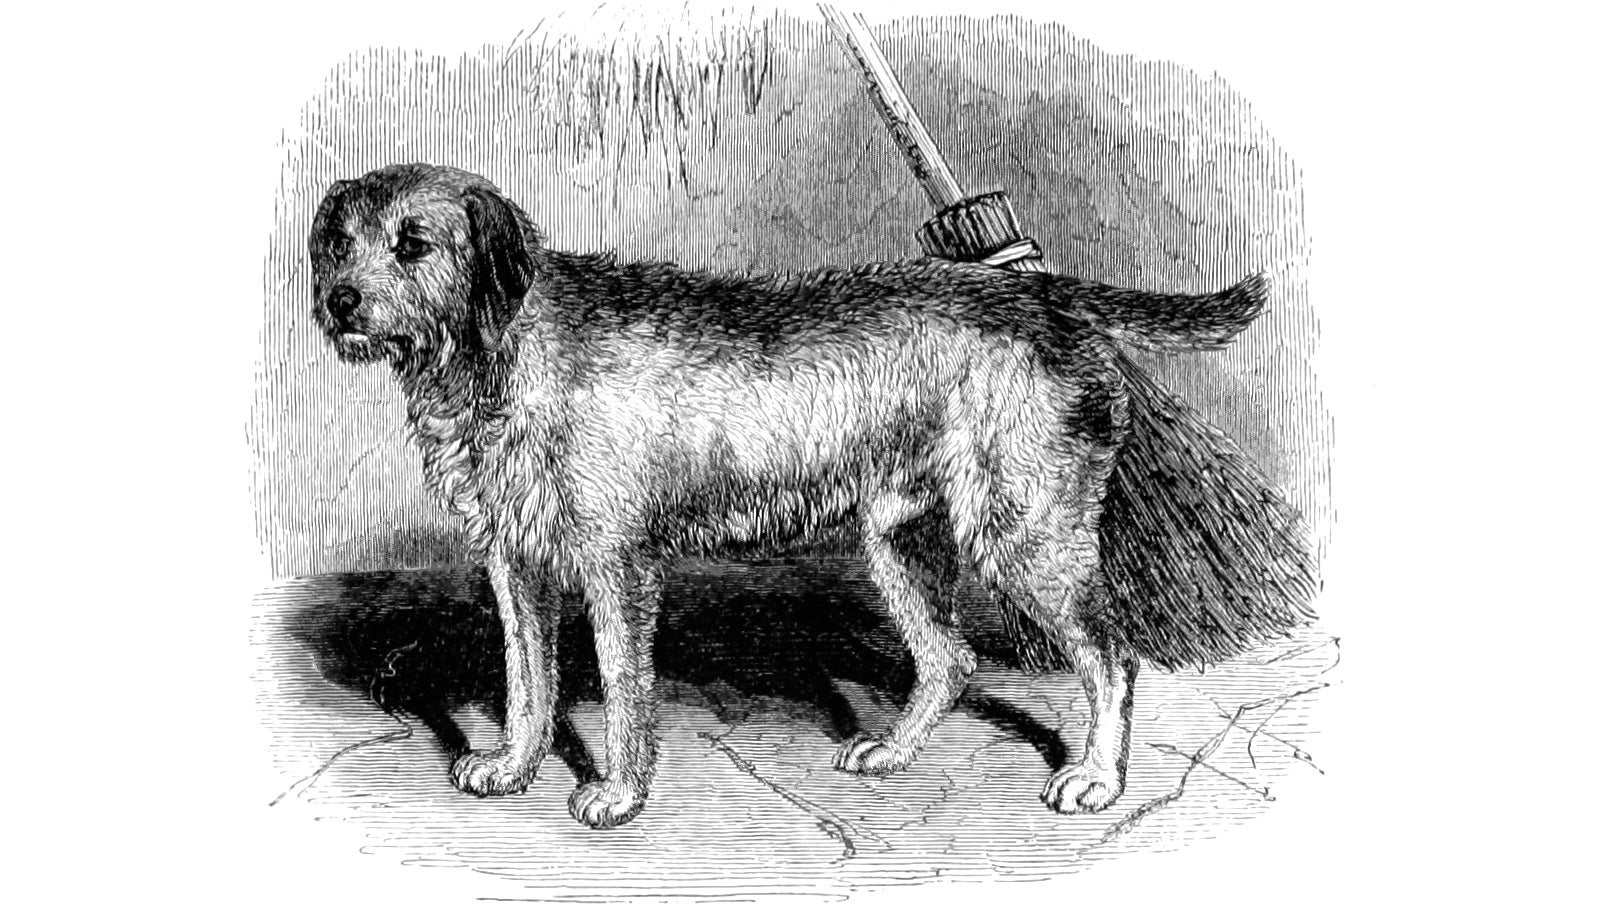 A scruffy dog stands by a broom in an illustration from 'The Moor and the Loch'.